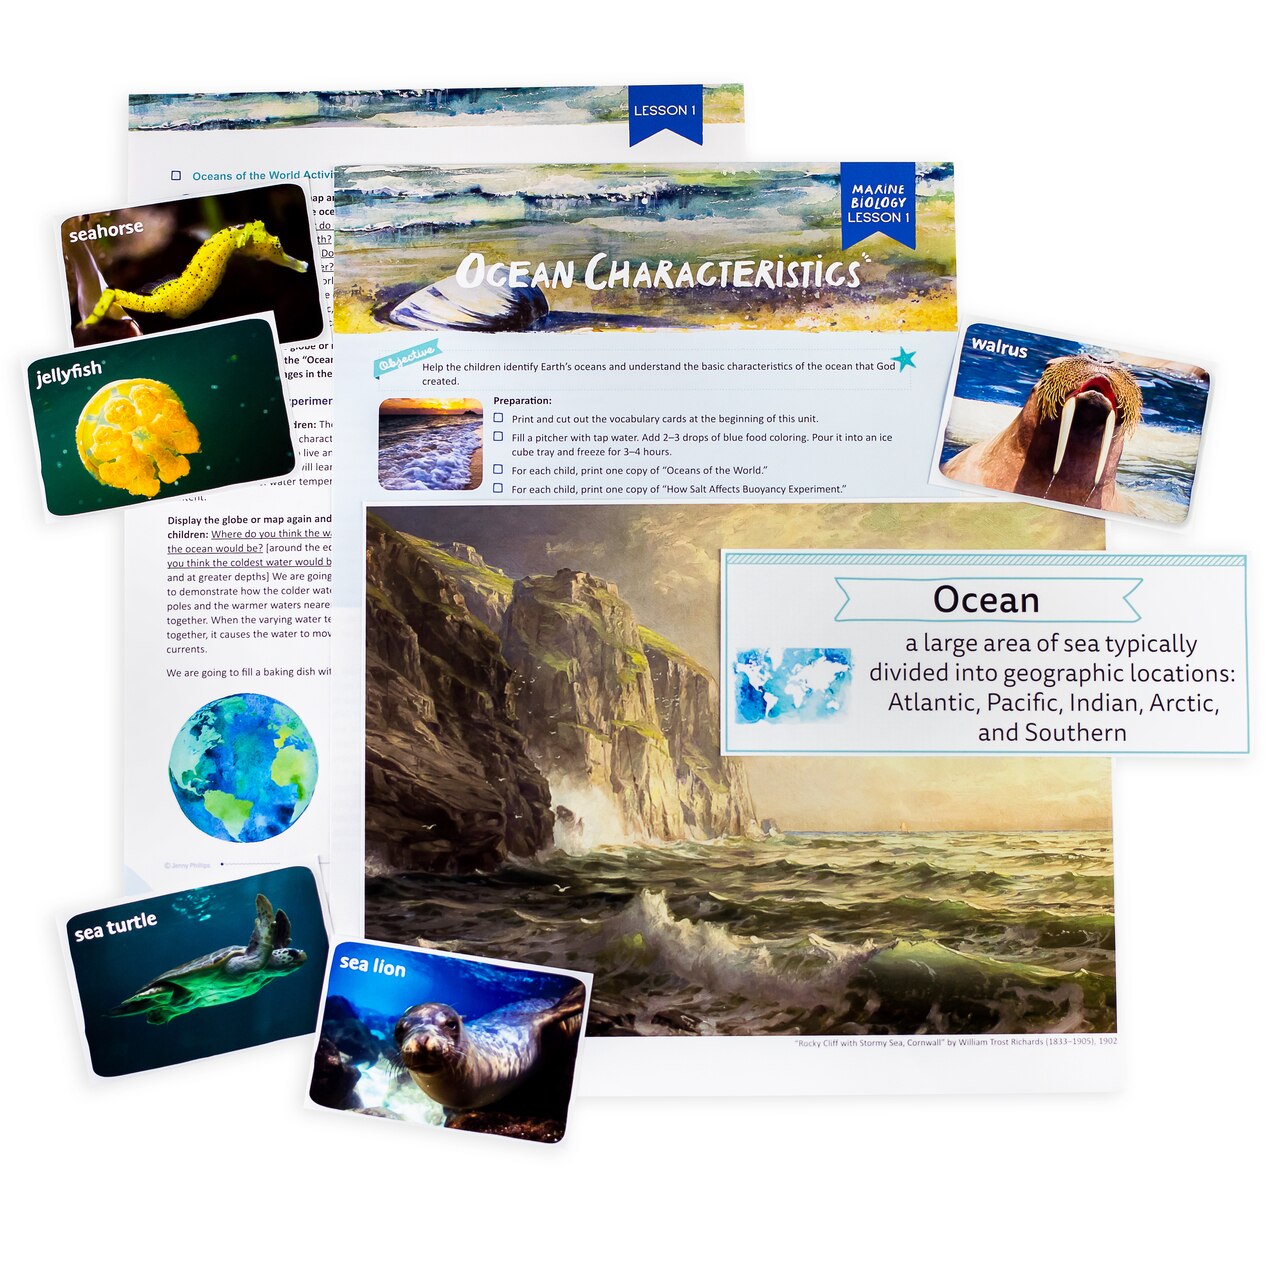 Free Marine Biology Course Download - The Good and the Beautiful